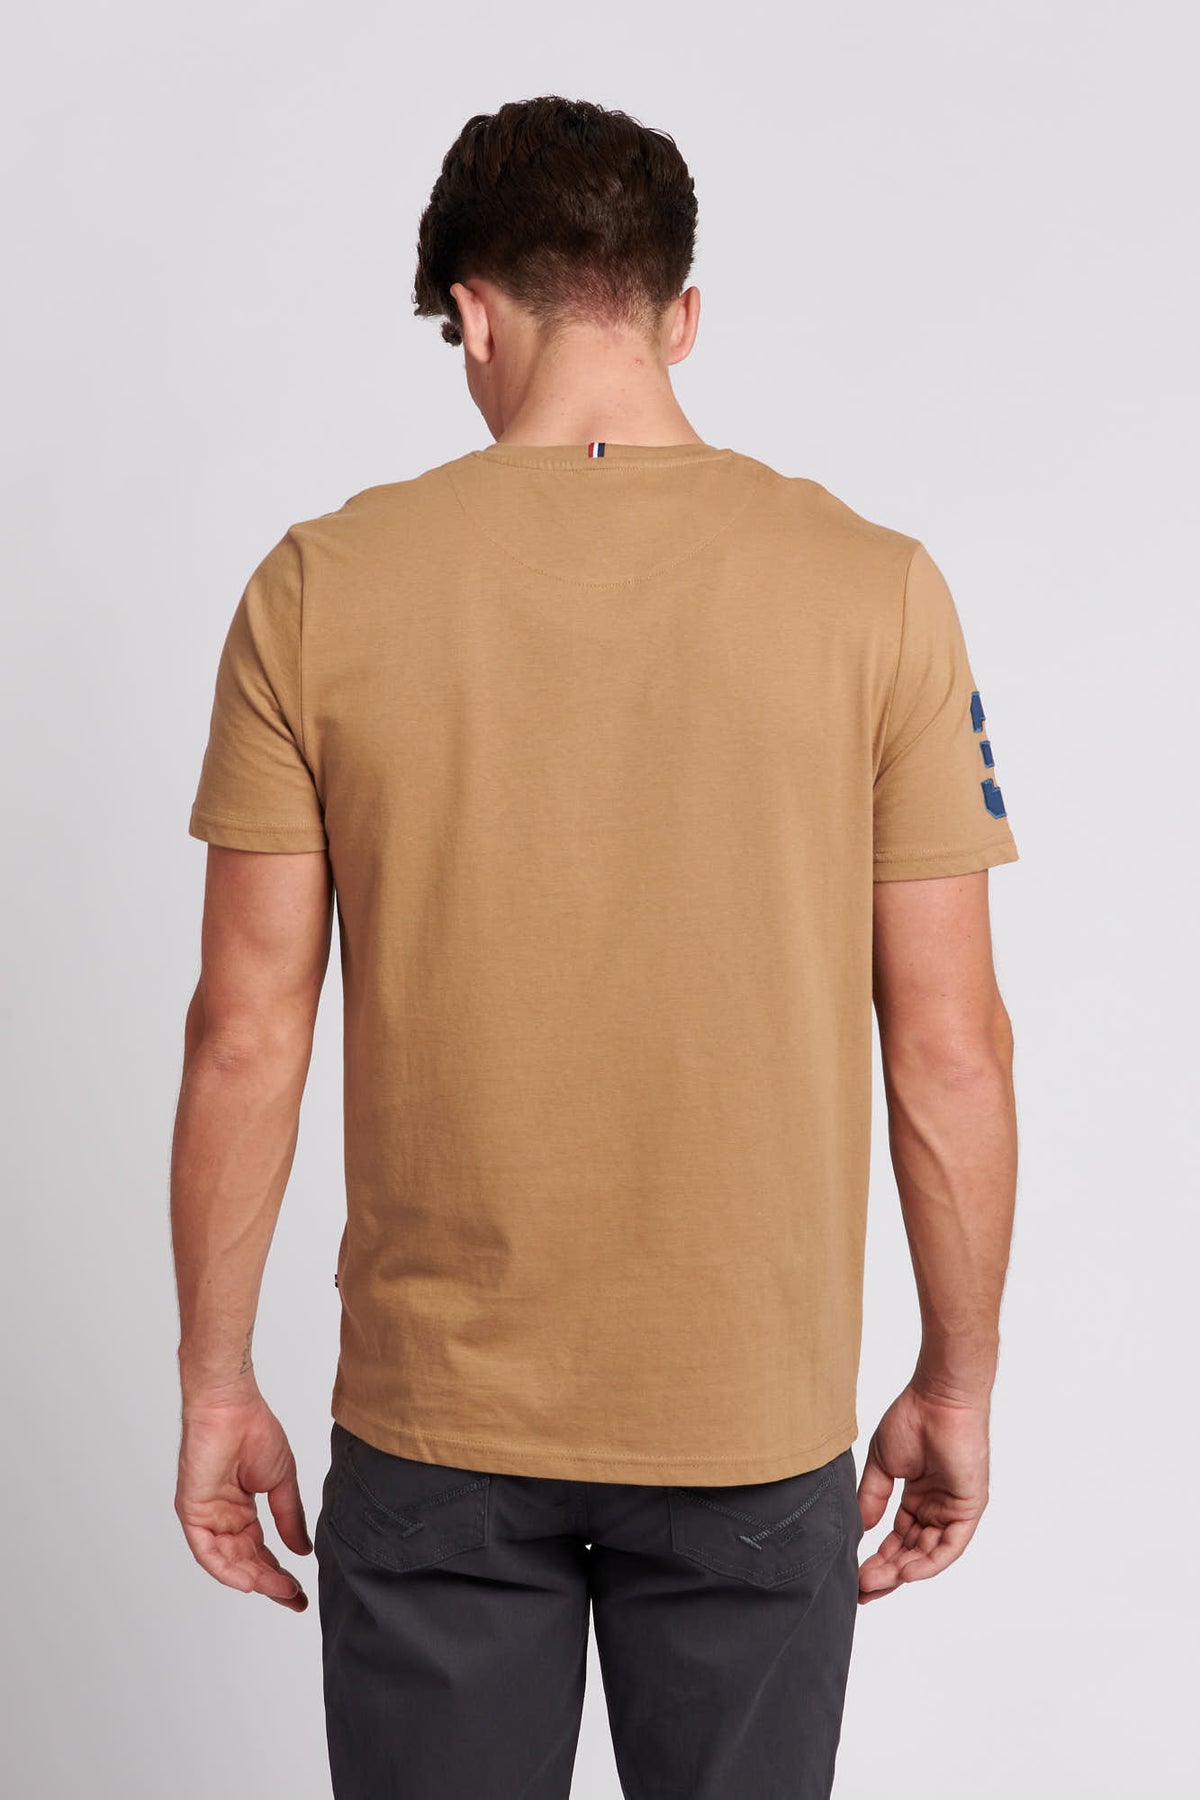 Mens Player 3 T-Shirt in Tigers Eye